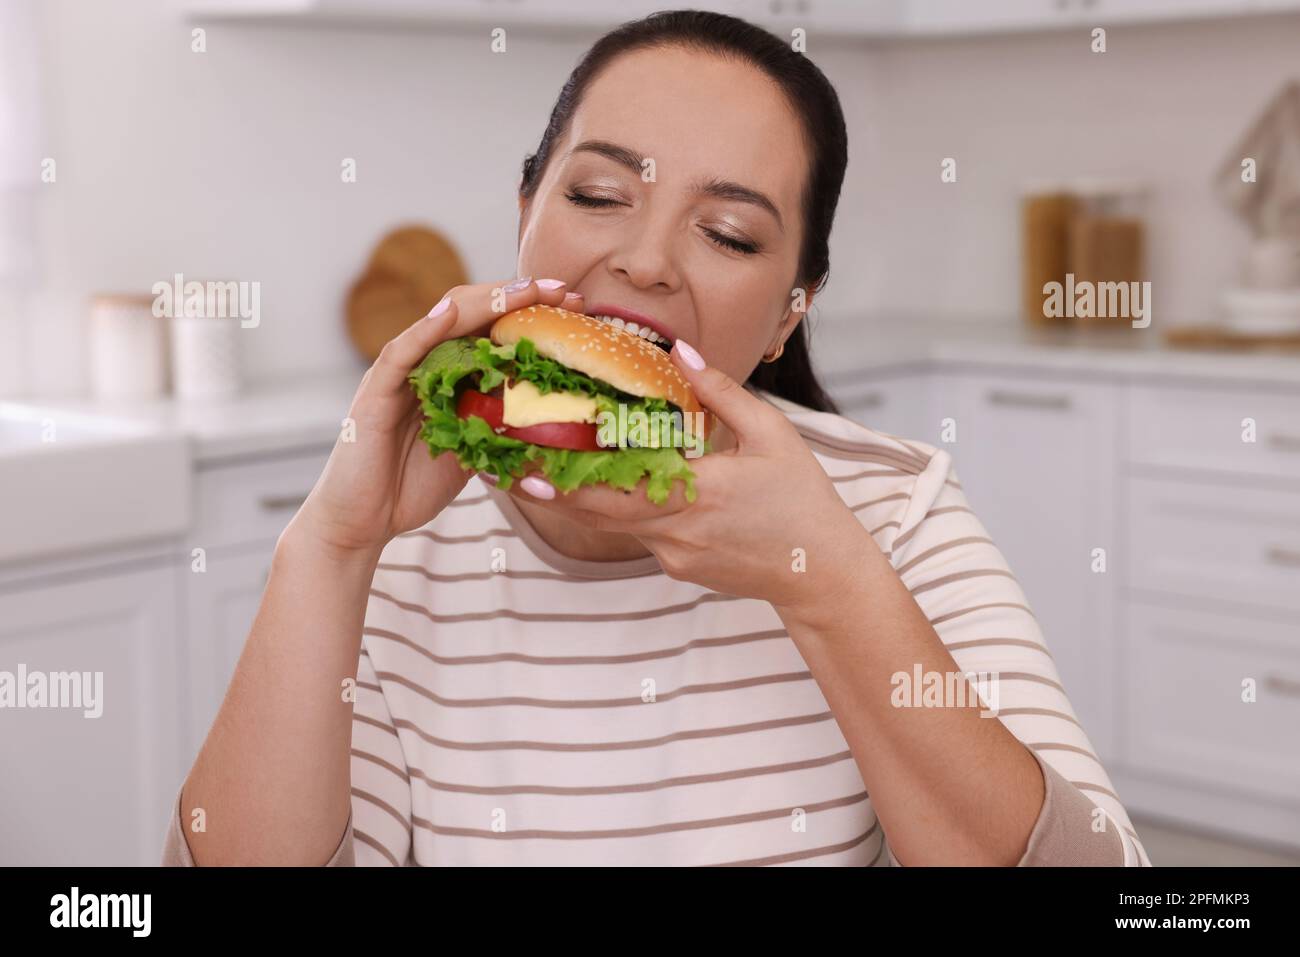 Overweight woman eating burger in kitchen at home Stock Photo